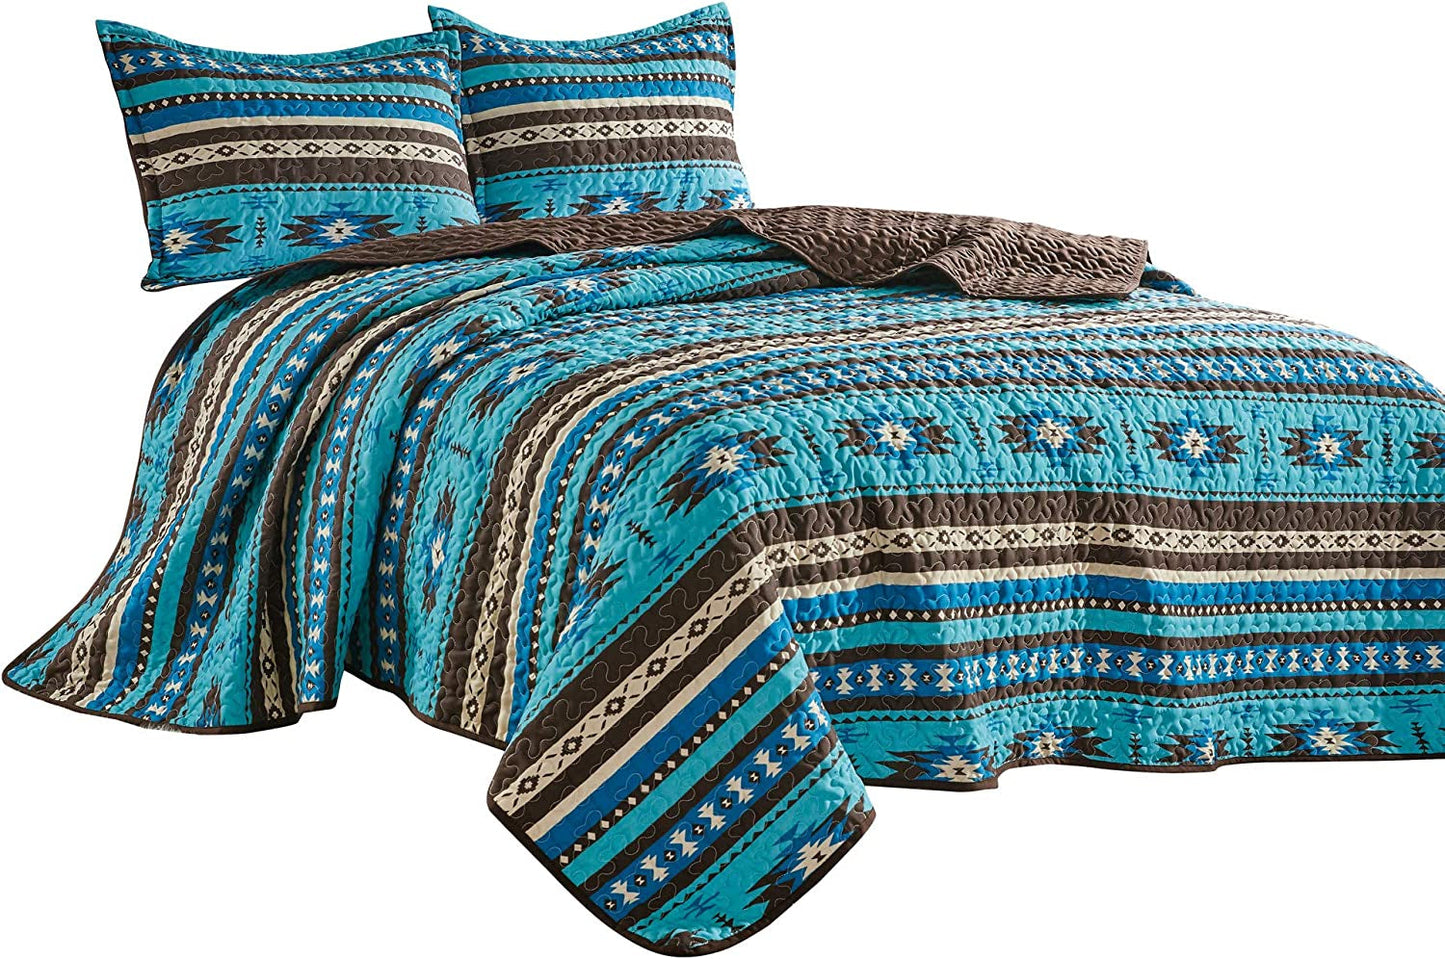 3-Piece Printed Oversize Queen Size Quilt Set, All-Season Bedspread, Native American Tribal Navajo Pattern Coverlet with Pillow Shams Bed Cover (Turquoise Blue, Brown, Khaki, Southwestern)